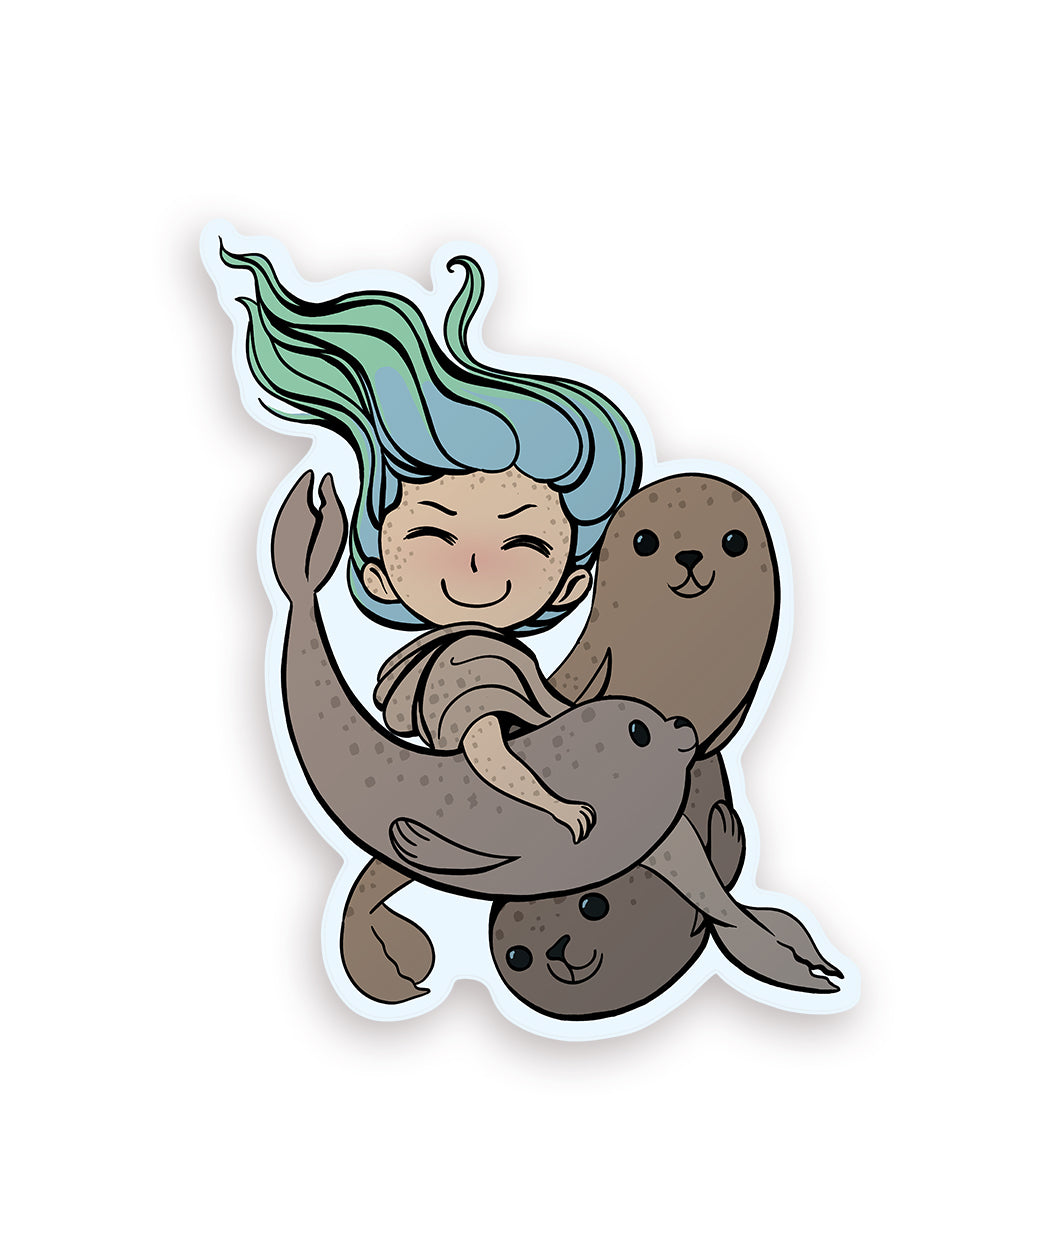 The Spirits sticker of the month for July is a Selkie. The sticker depicts a girl with blue and green hair and a mermaid type tail. She is sandwhiched between three seals, smiling with her eyes closed. 